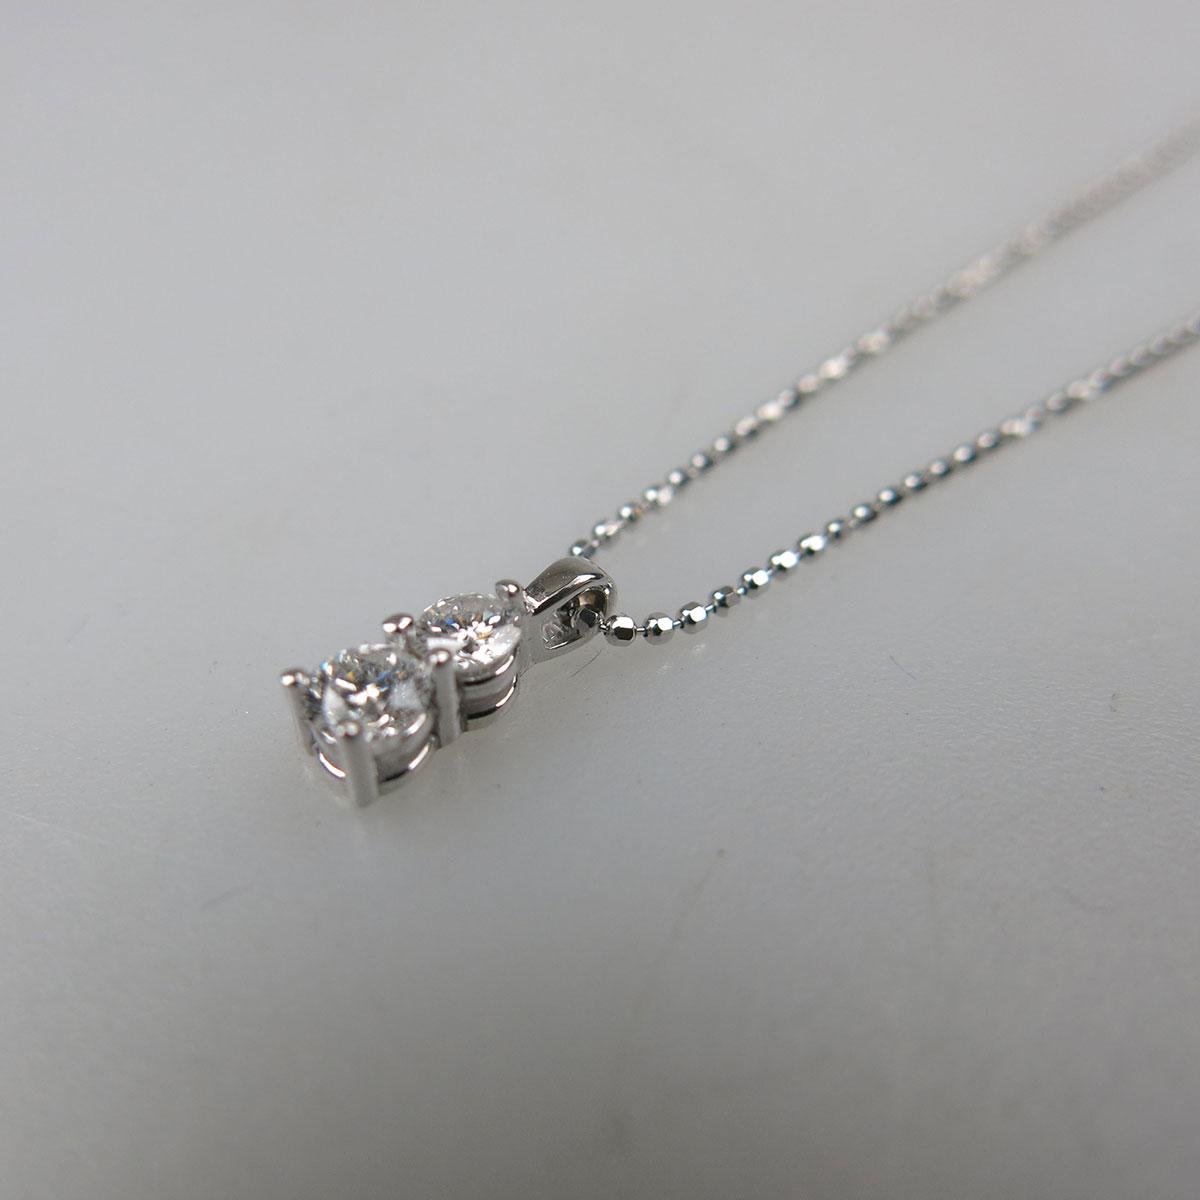 14k White Gold Chain and Pendant set with 2 brilliant cut Canadian diamonds (approx. 0.28ct.t.w.)